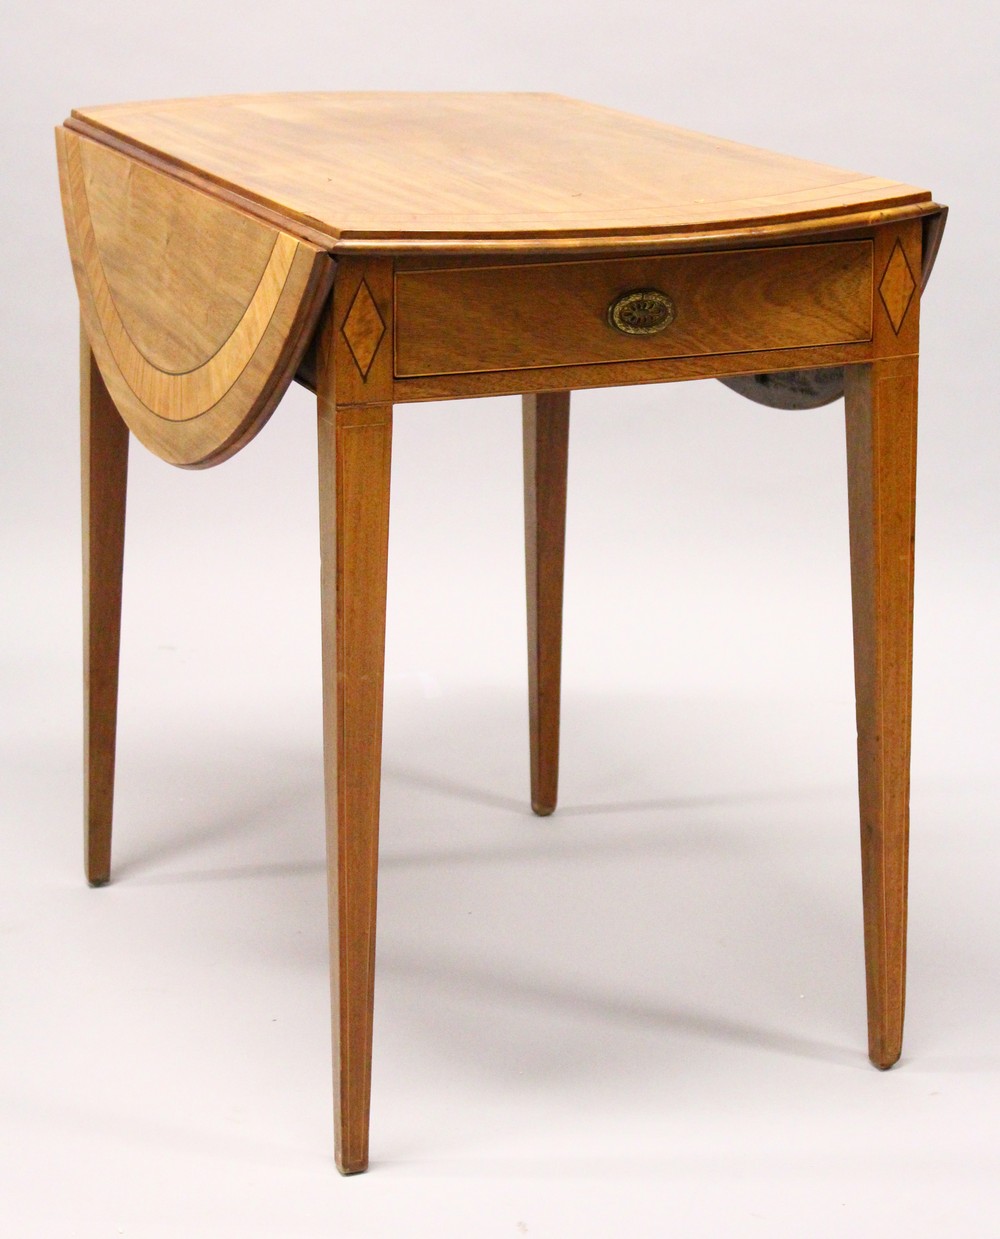 A GEORGE III MAHOGANY AND SATINWOOD BANDED PEMBROKE TABLE, with a drawer to one end, on tapering